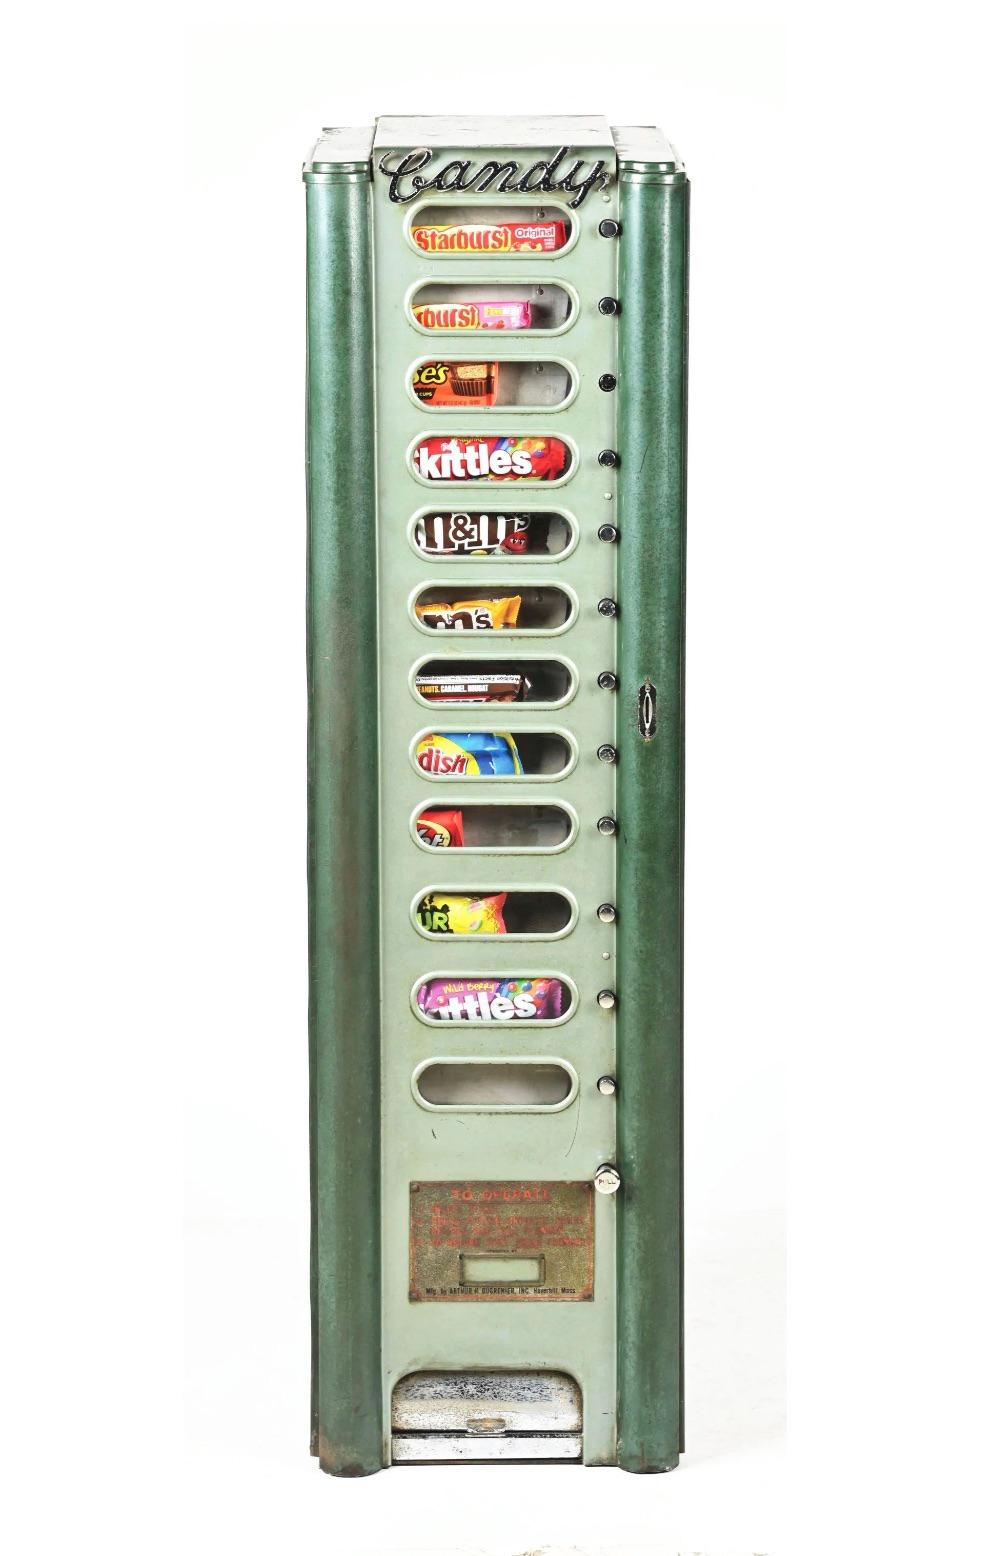 Vintage circa 1950s candy vending machine made by Arthur H. Dugrenier. The cabinet is painted in light mint and green colors with chrome trim giving this piece a beautiful, art deco’esque theme. Chrome letters run across the top of the machine that